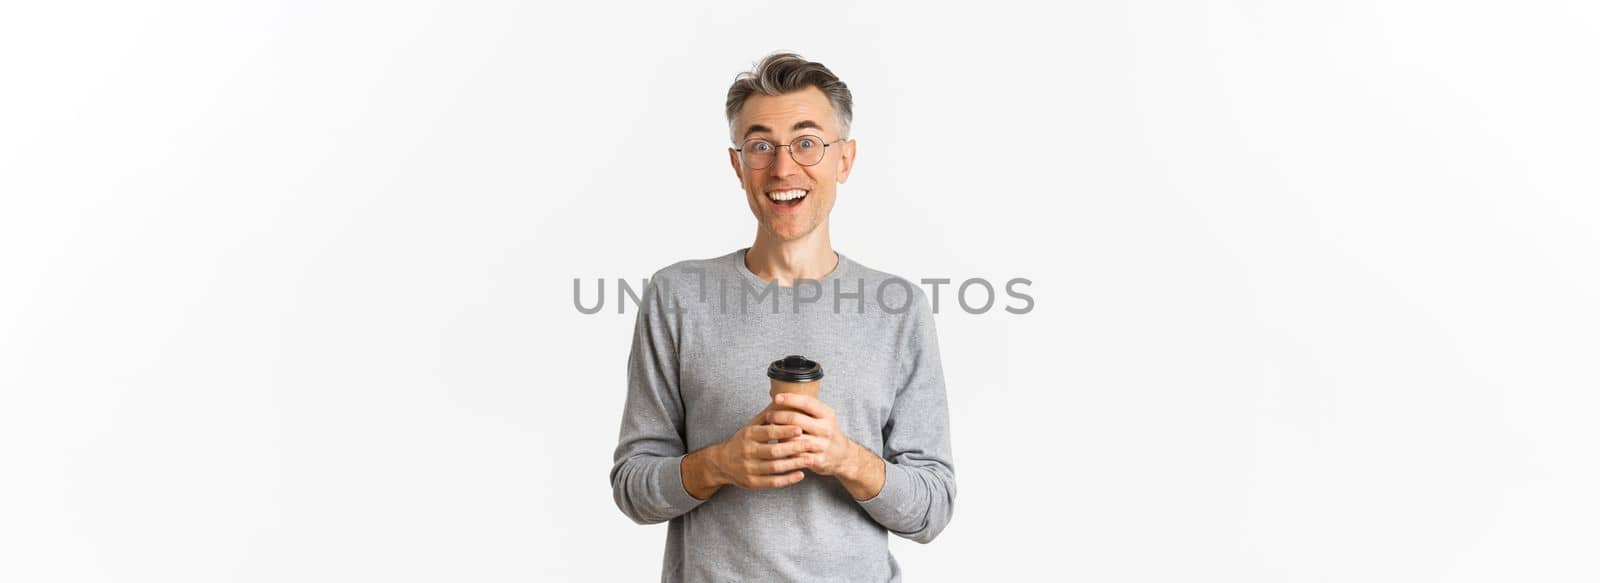 Portrait of surprised and happy middle-aged man in glasses and grey sweater, drinking coffee from takeaway cup and looking amazed, standing over white background.